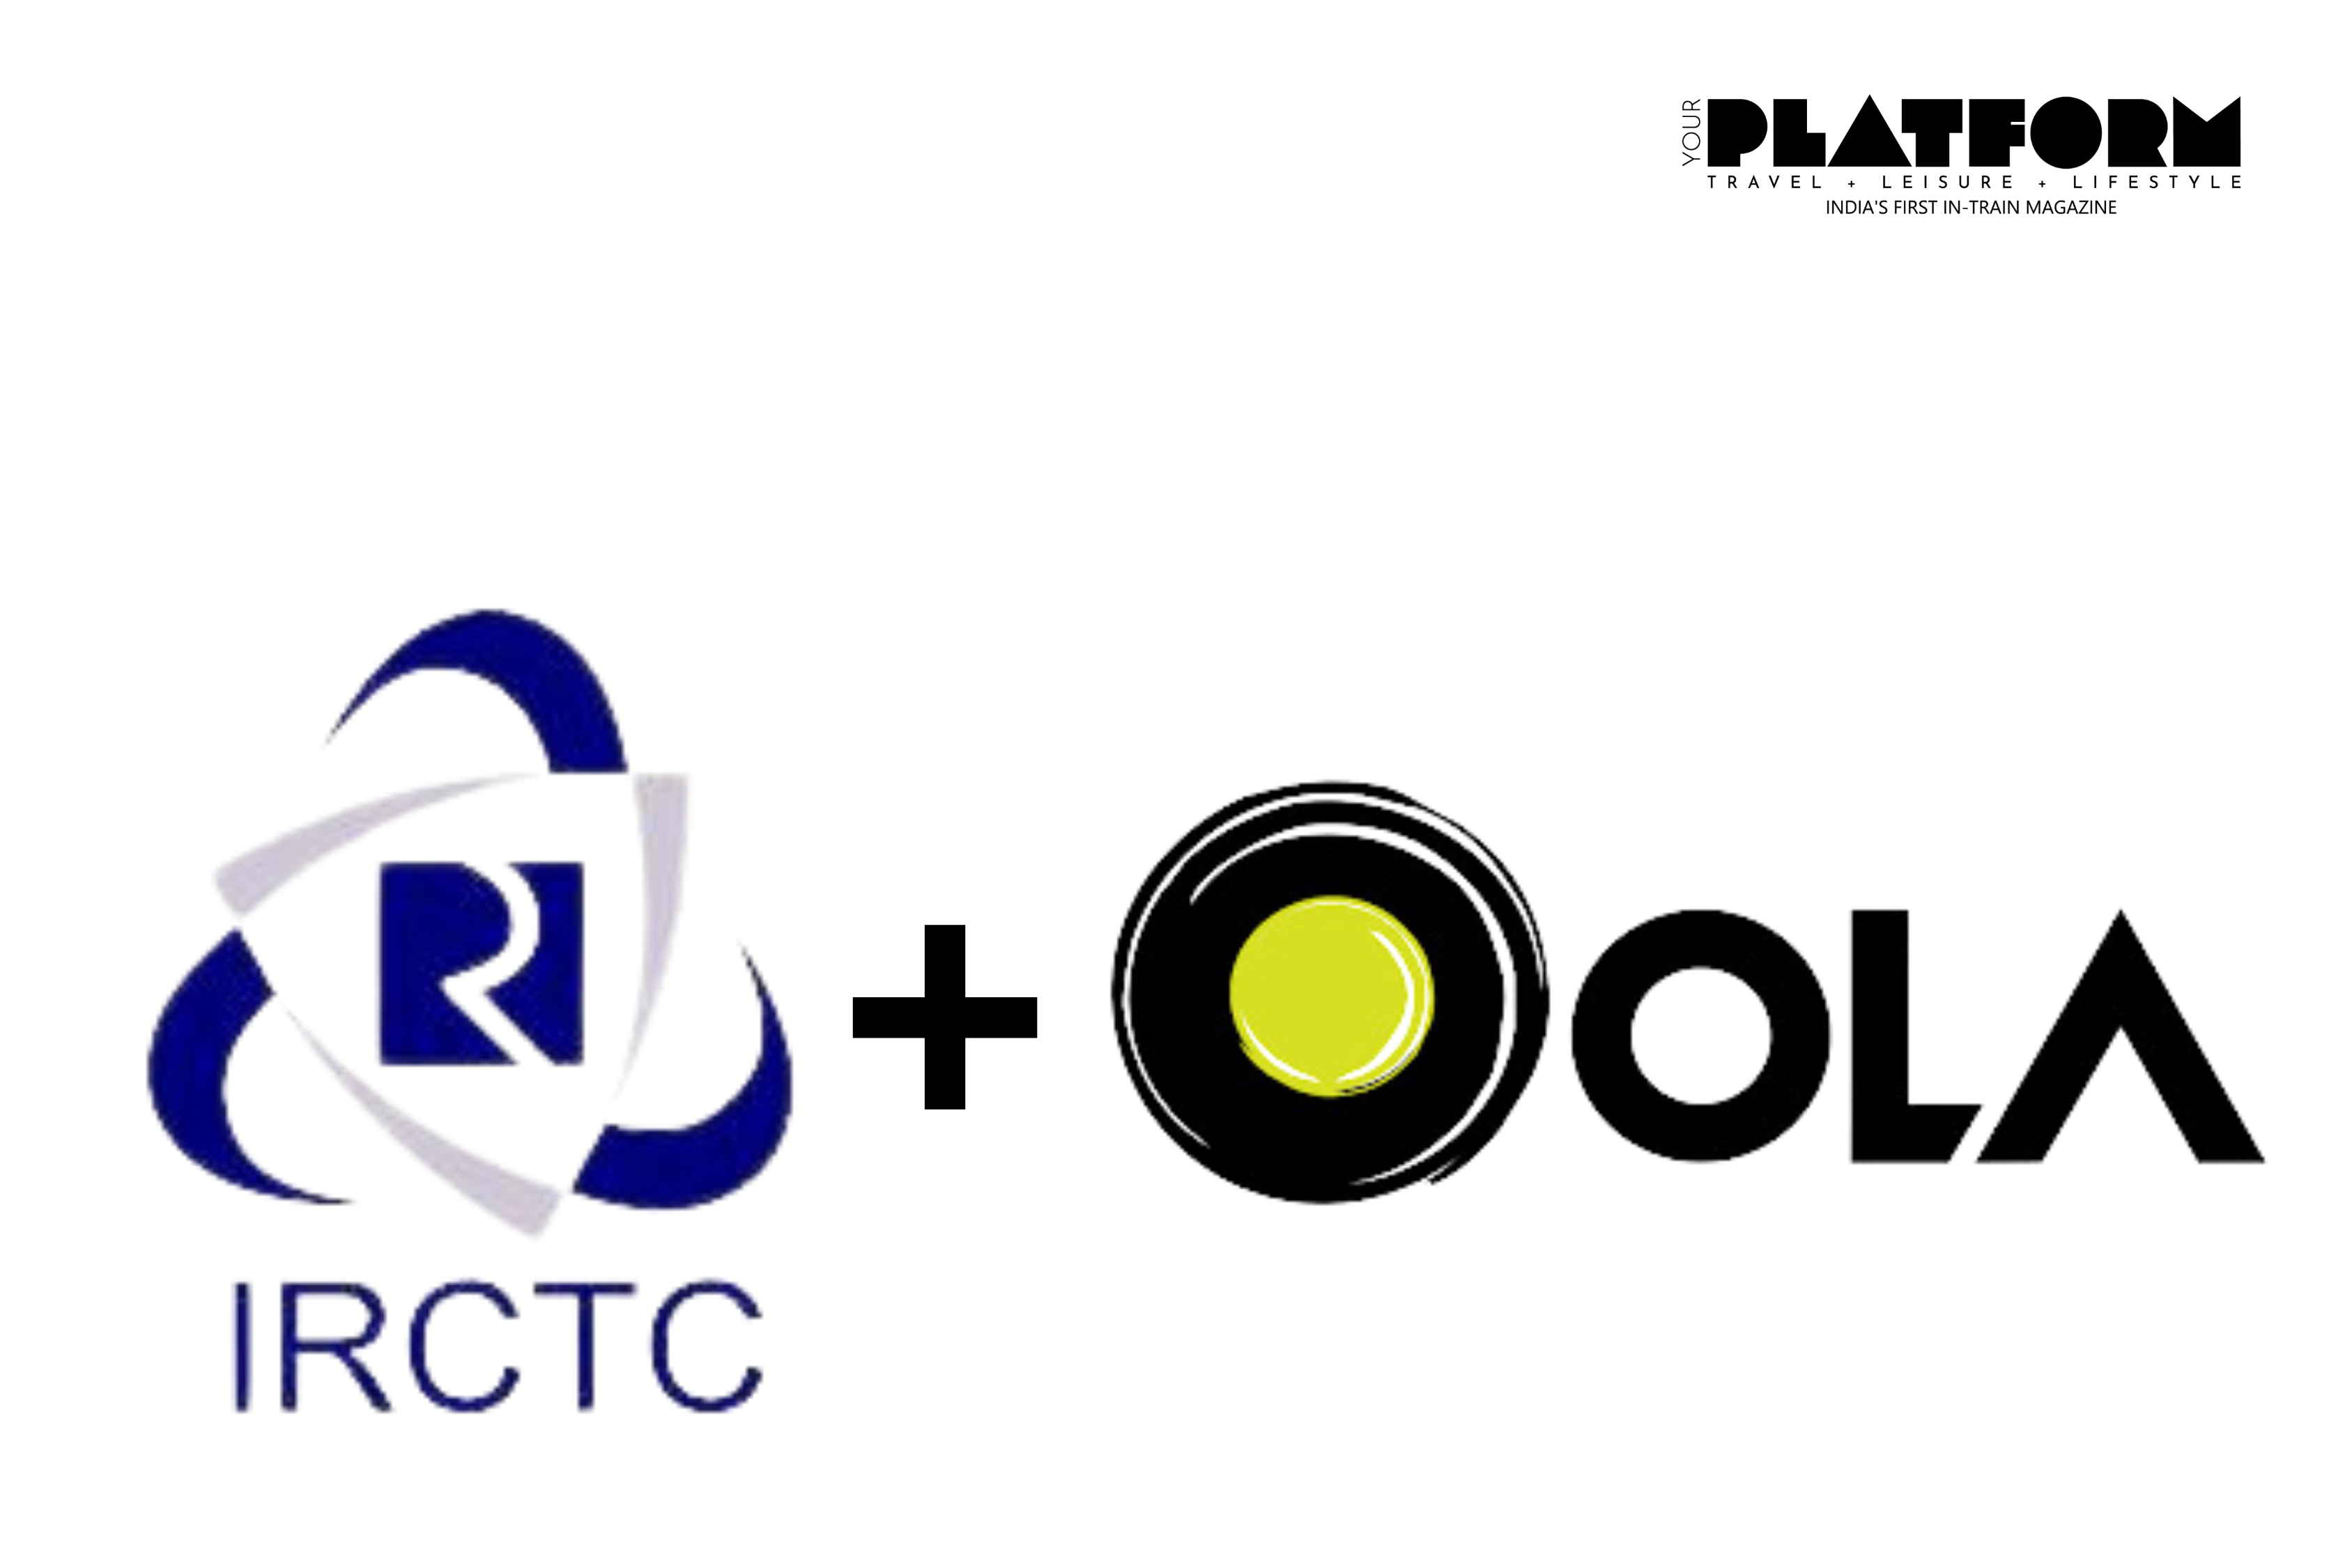 Train Travel Goes Seamless: IRCTC and Ola Join Forces for Easy Cab Booking